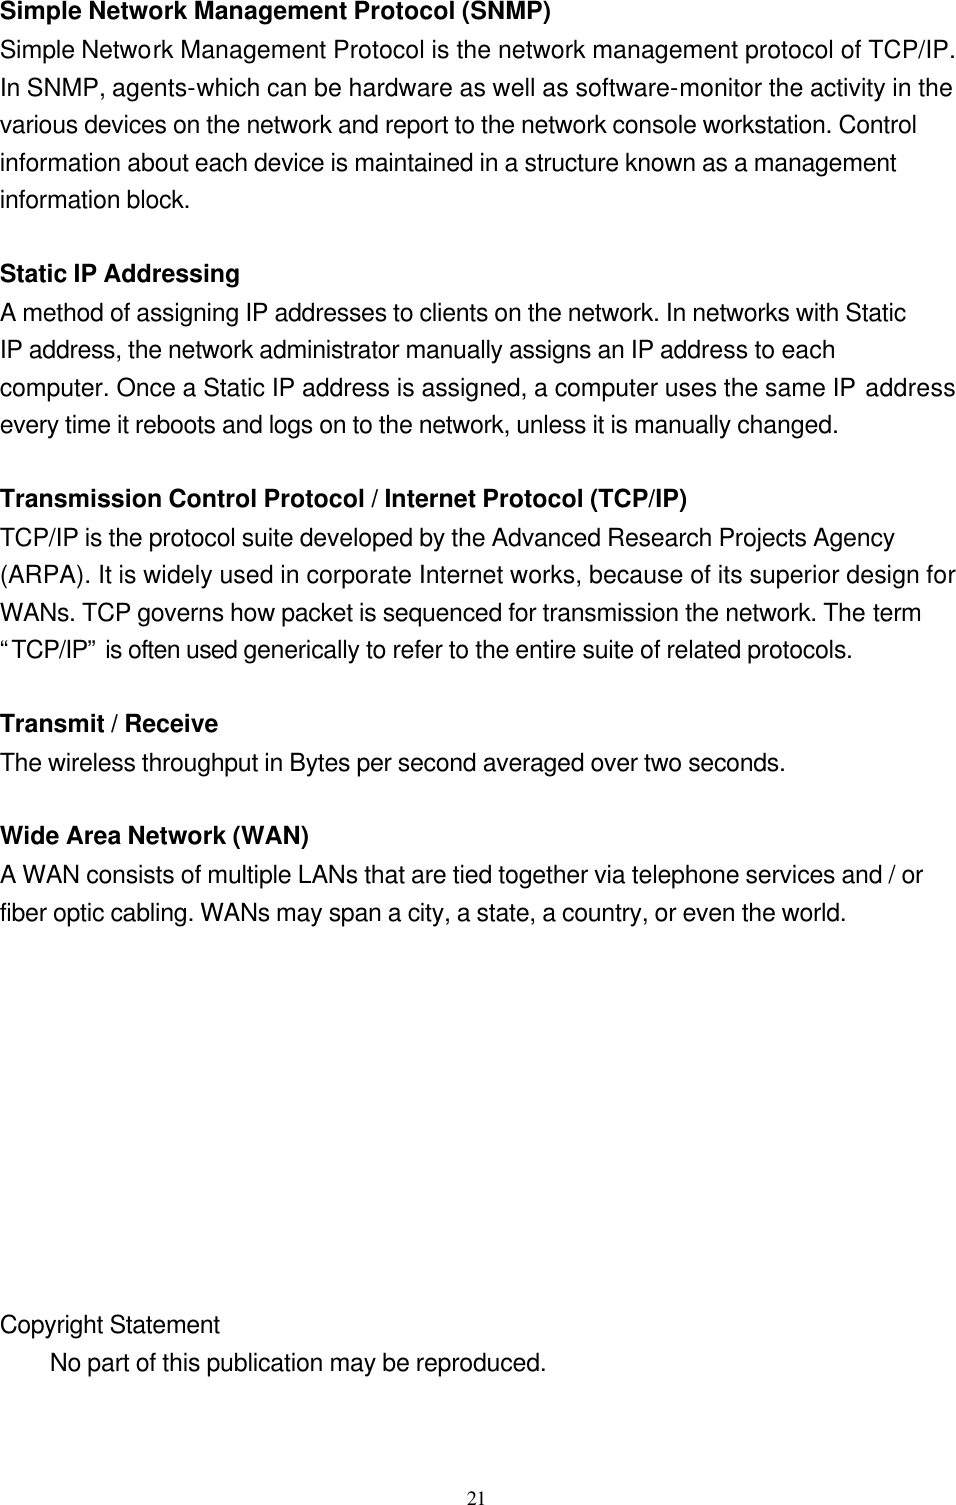  21  Simple Network Management Protocol (SNMP) Simple Network Management Protocol is the network management protocol of TCP/IP. In SNMP, agents-which can be hardware as well as software-monitor the activity in the various devices on the network and report to the network console workstation. Control information about each device is maintained in a structure known as a management information block.  Static IP Addressing A method of assigning IP addresses to clients on the network. In networks with Static IP address, the network administrator manually assigns an IP address to each computer. Once a Static IP address is assigned, a computer uses the same IP address every time it reboots and logs on to the network, unless it is manually changed.  Transmission Control Protocol / Internet Protocol (TCP/IP) TCP/IP is the protocol suite developed by the Advanced Research Projects Agency (ARPA). It is widely used in corporate Internet works, because of its superior design for WANs. TCP governs how packet is sequenced for transmission the network. The term “TCP/IP” is often used generically to refer to the entire suite of related protocols.  Transmit / Receive The wireless throughput in Bytes per second averaged over two seconds.  Wide Area Network (WAN) A WAN consists of multiple LANs that are tied together via telephone services and / or fiber optic cabling. WANs may span a city, a state, a country, or even the world.           Copyright Statement  No part of this publication may be reproduced.   